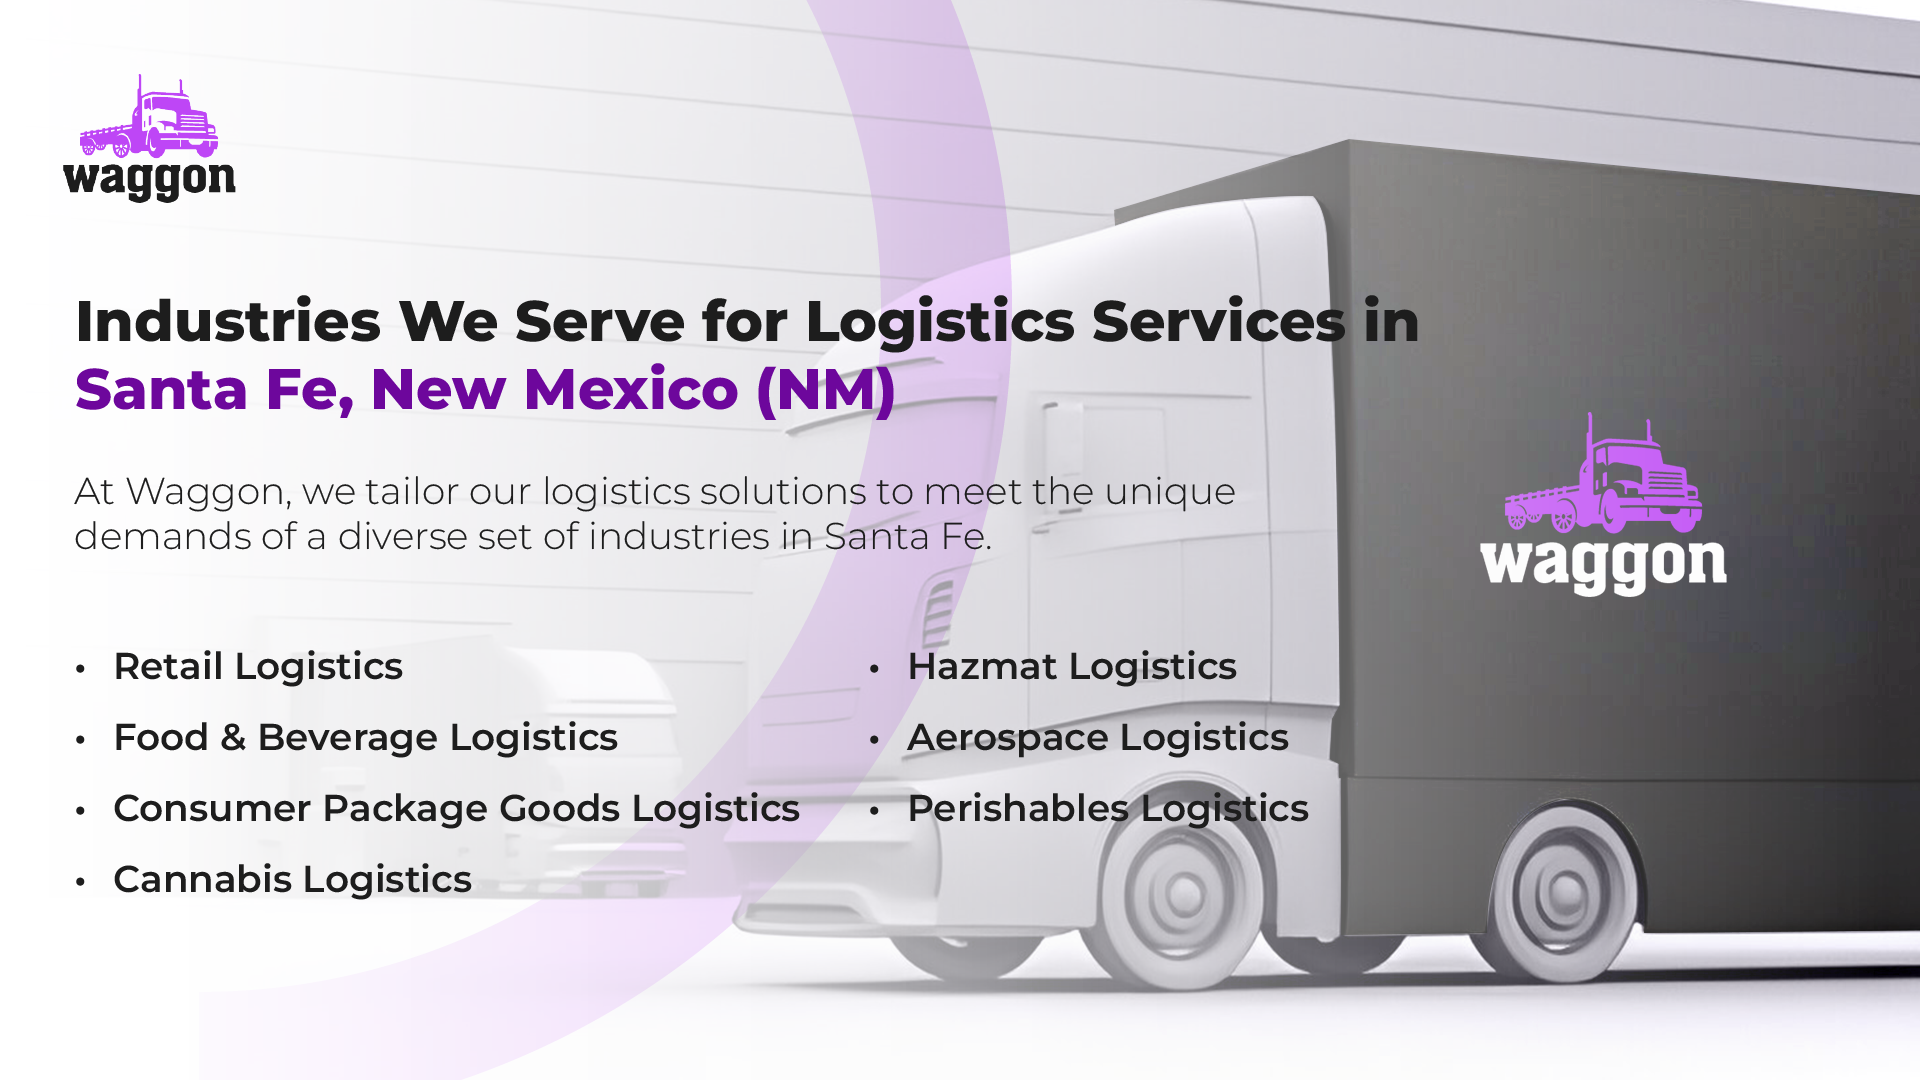 Industries We Serve for Logistics Services in Santa Fe, New Mexico (NM)